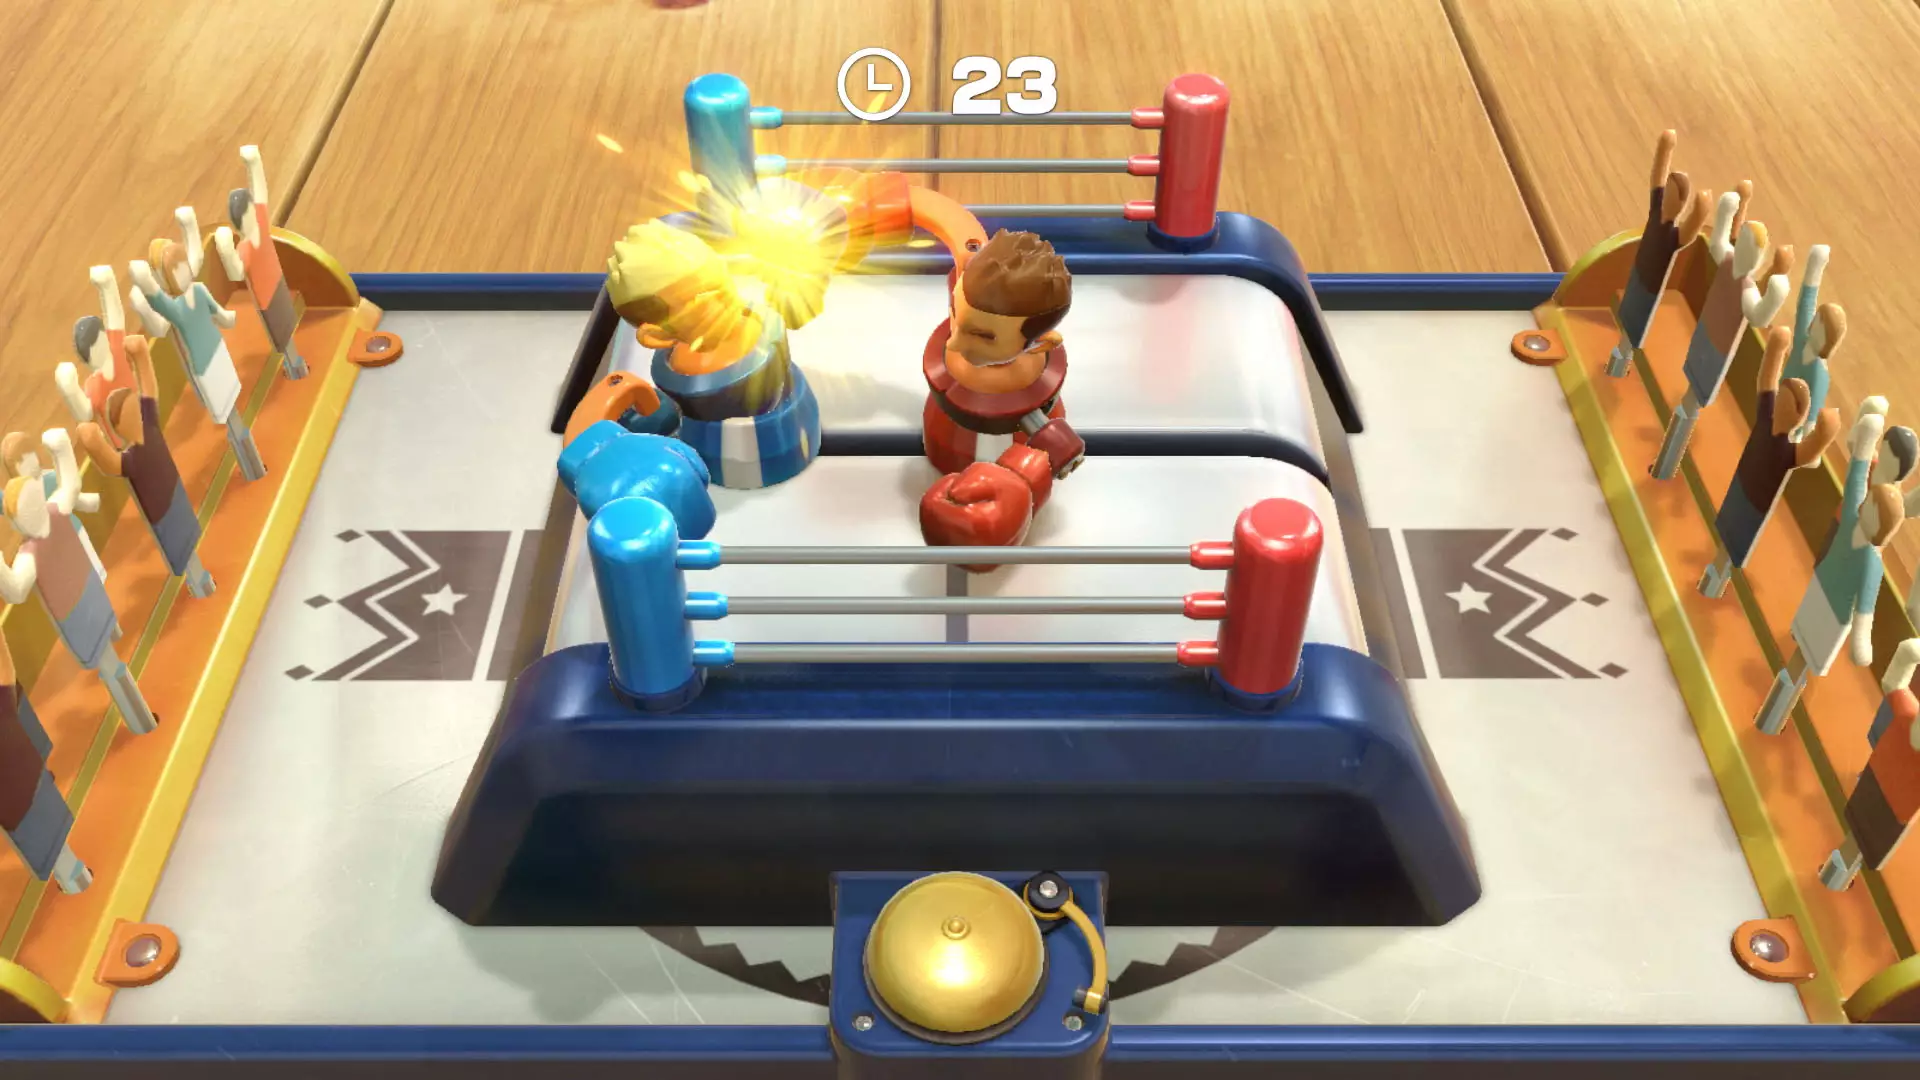 51 Worldwide Games: Toy Boxing /